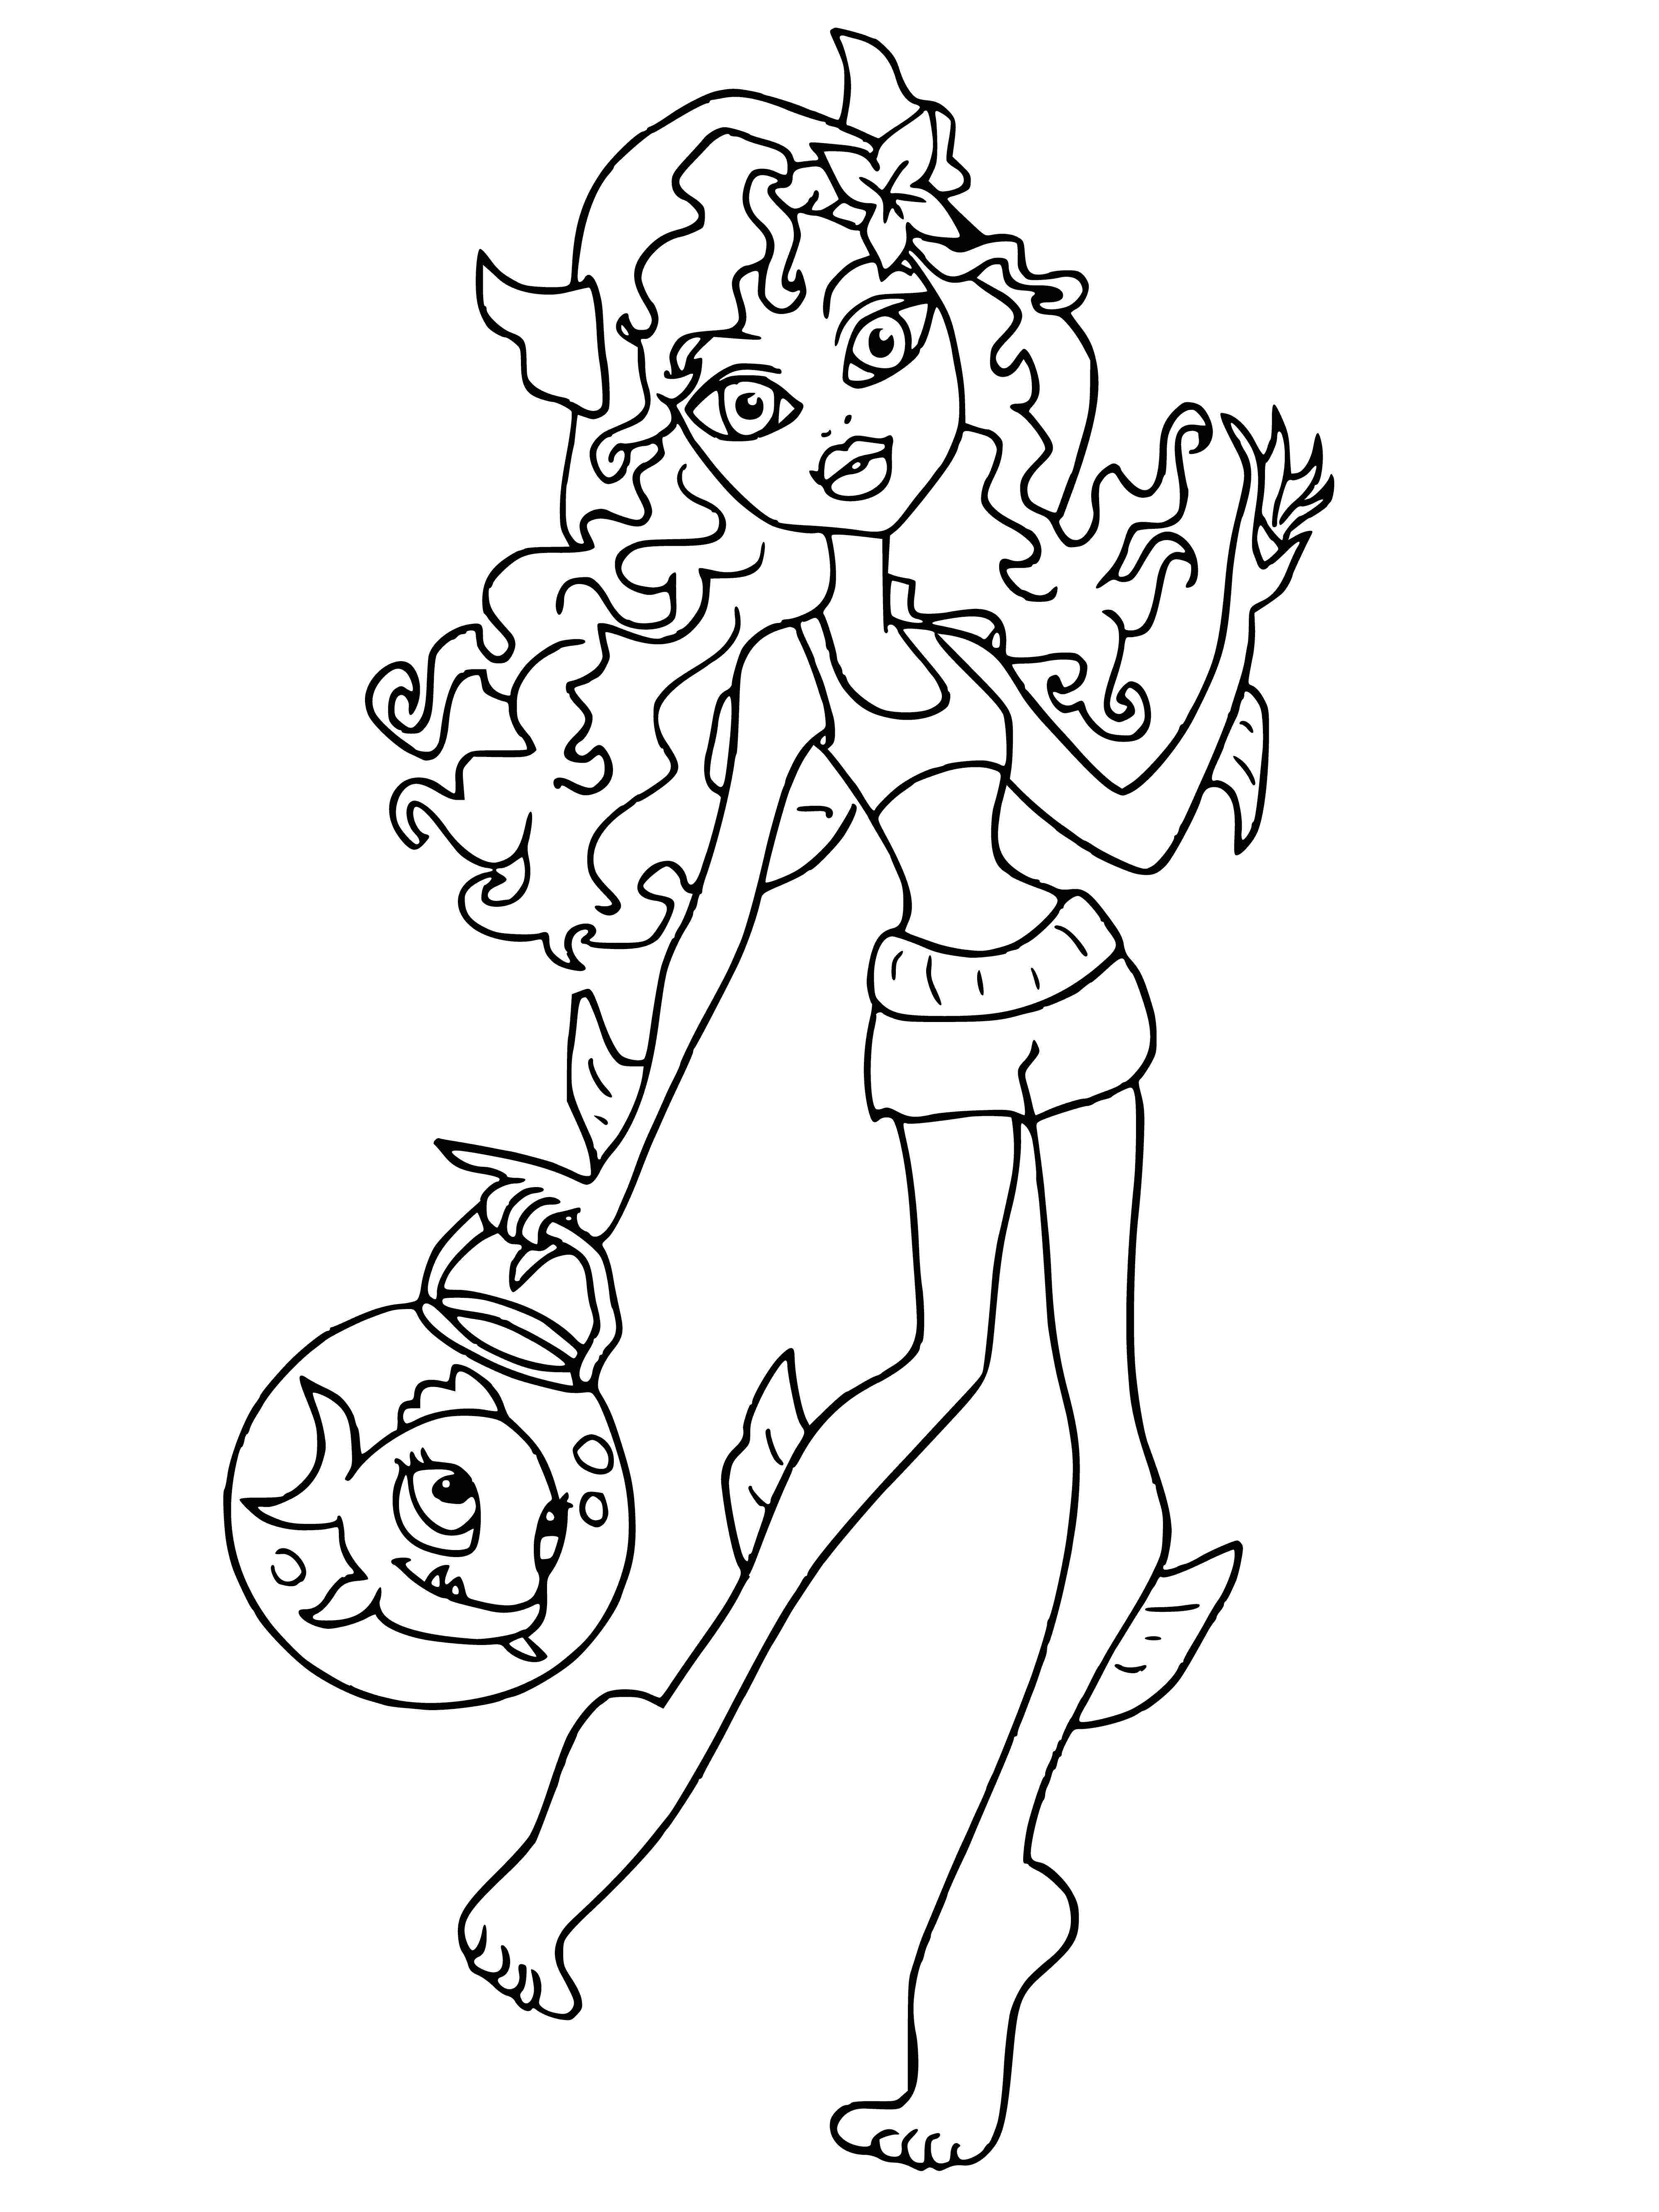 coloring page: Girl in blue bikini sits on rock in blue lagoon; behind her is a blue Neptune Piranha with blue fins and eyes. #BlueEverything #Beauty